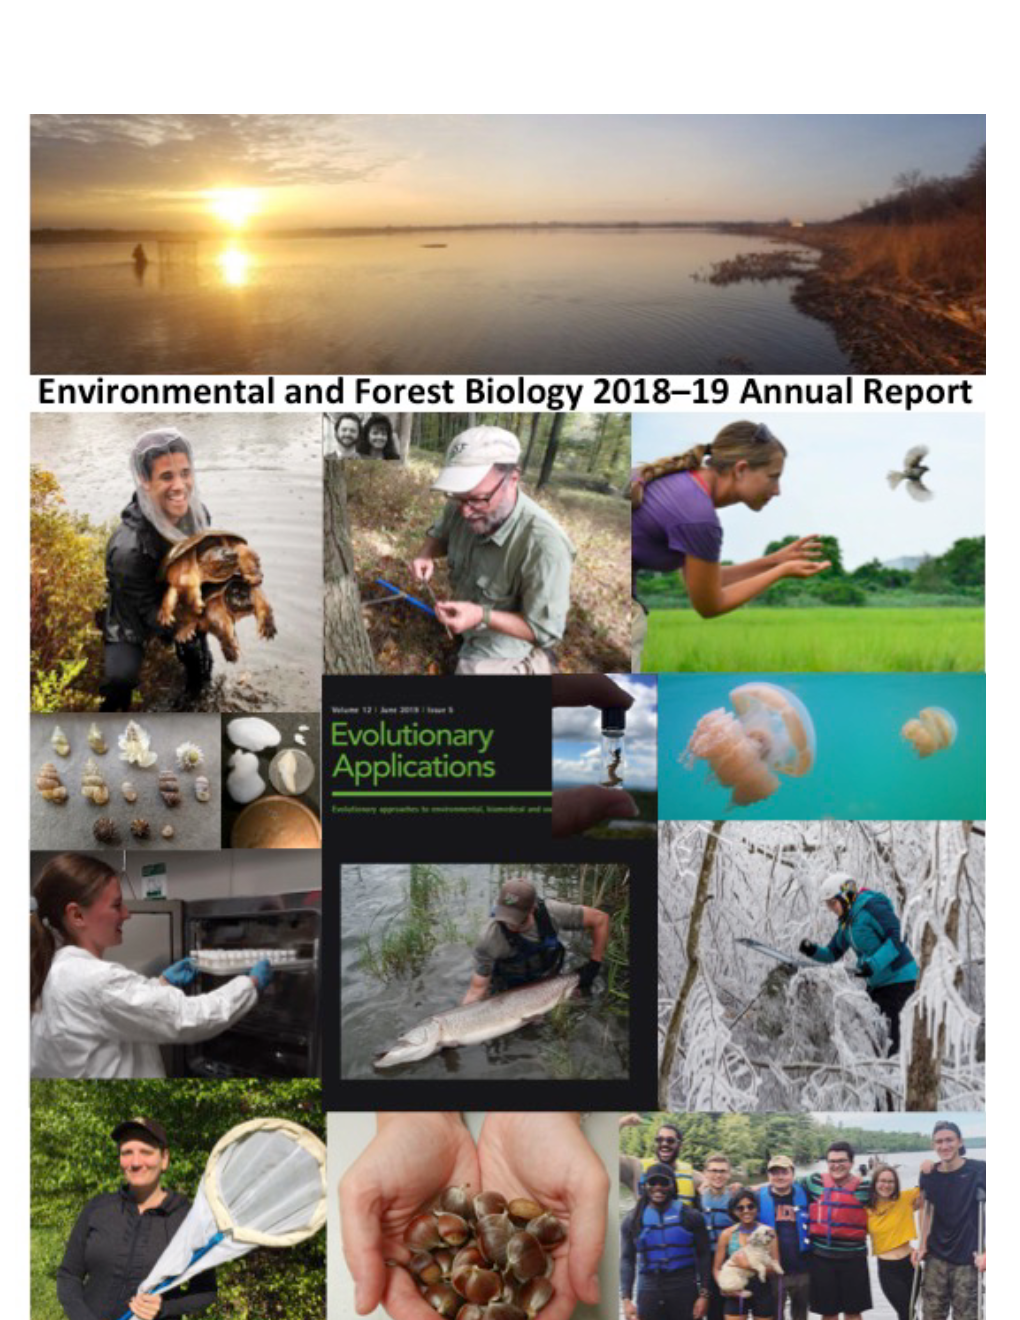 Department of Environmental & Forest Biology Annual Report